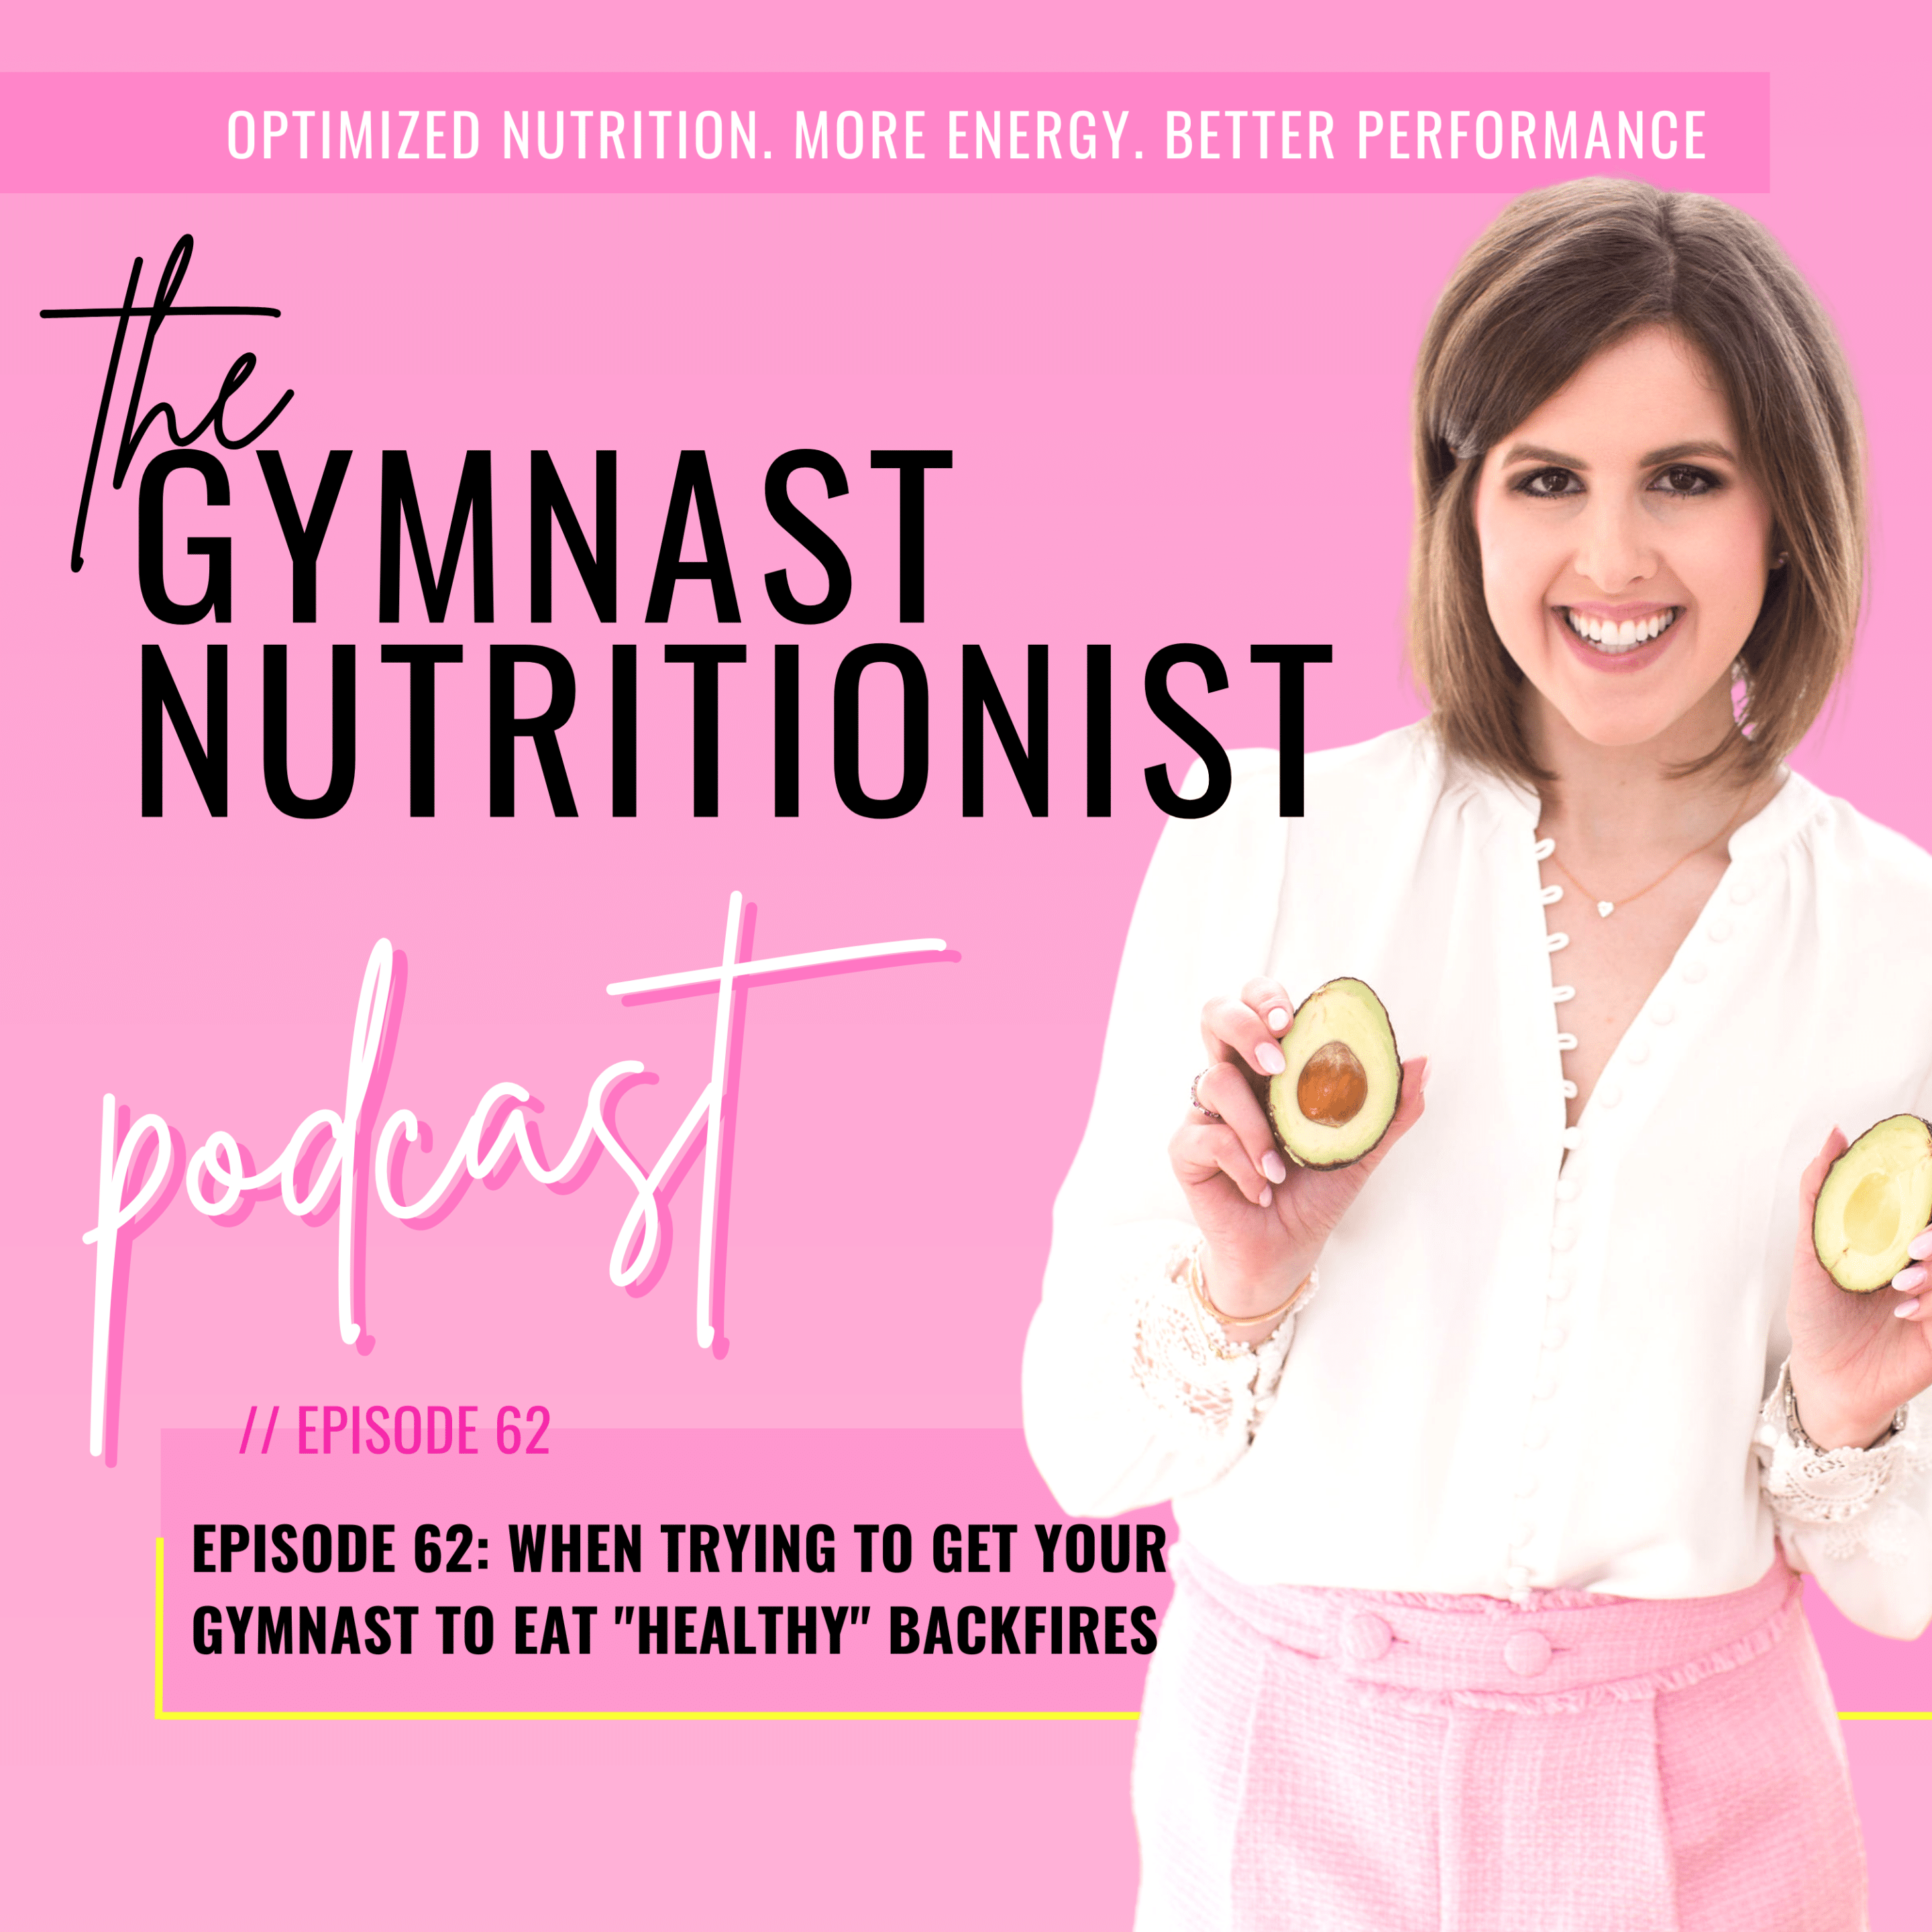 Episode 62: When trying to get your gymnast to eat "healthy" backfires